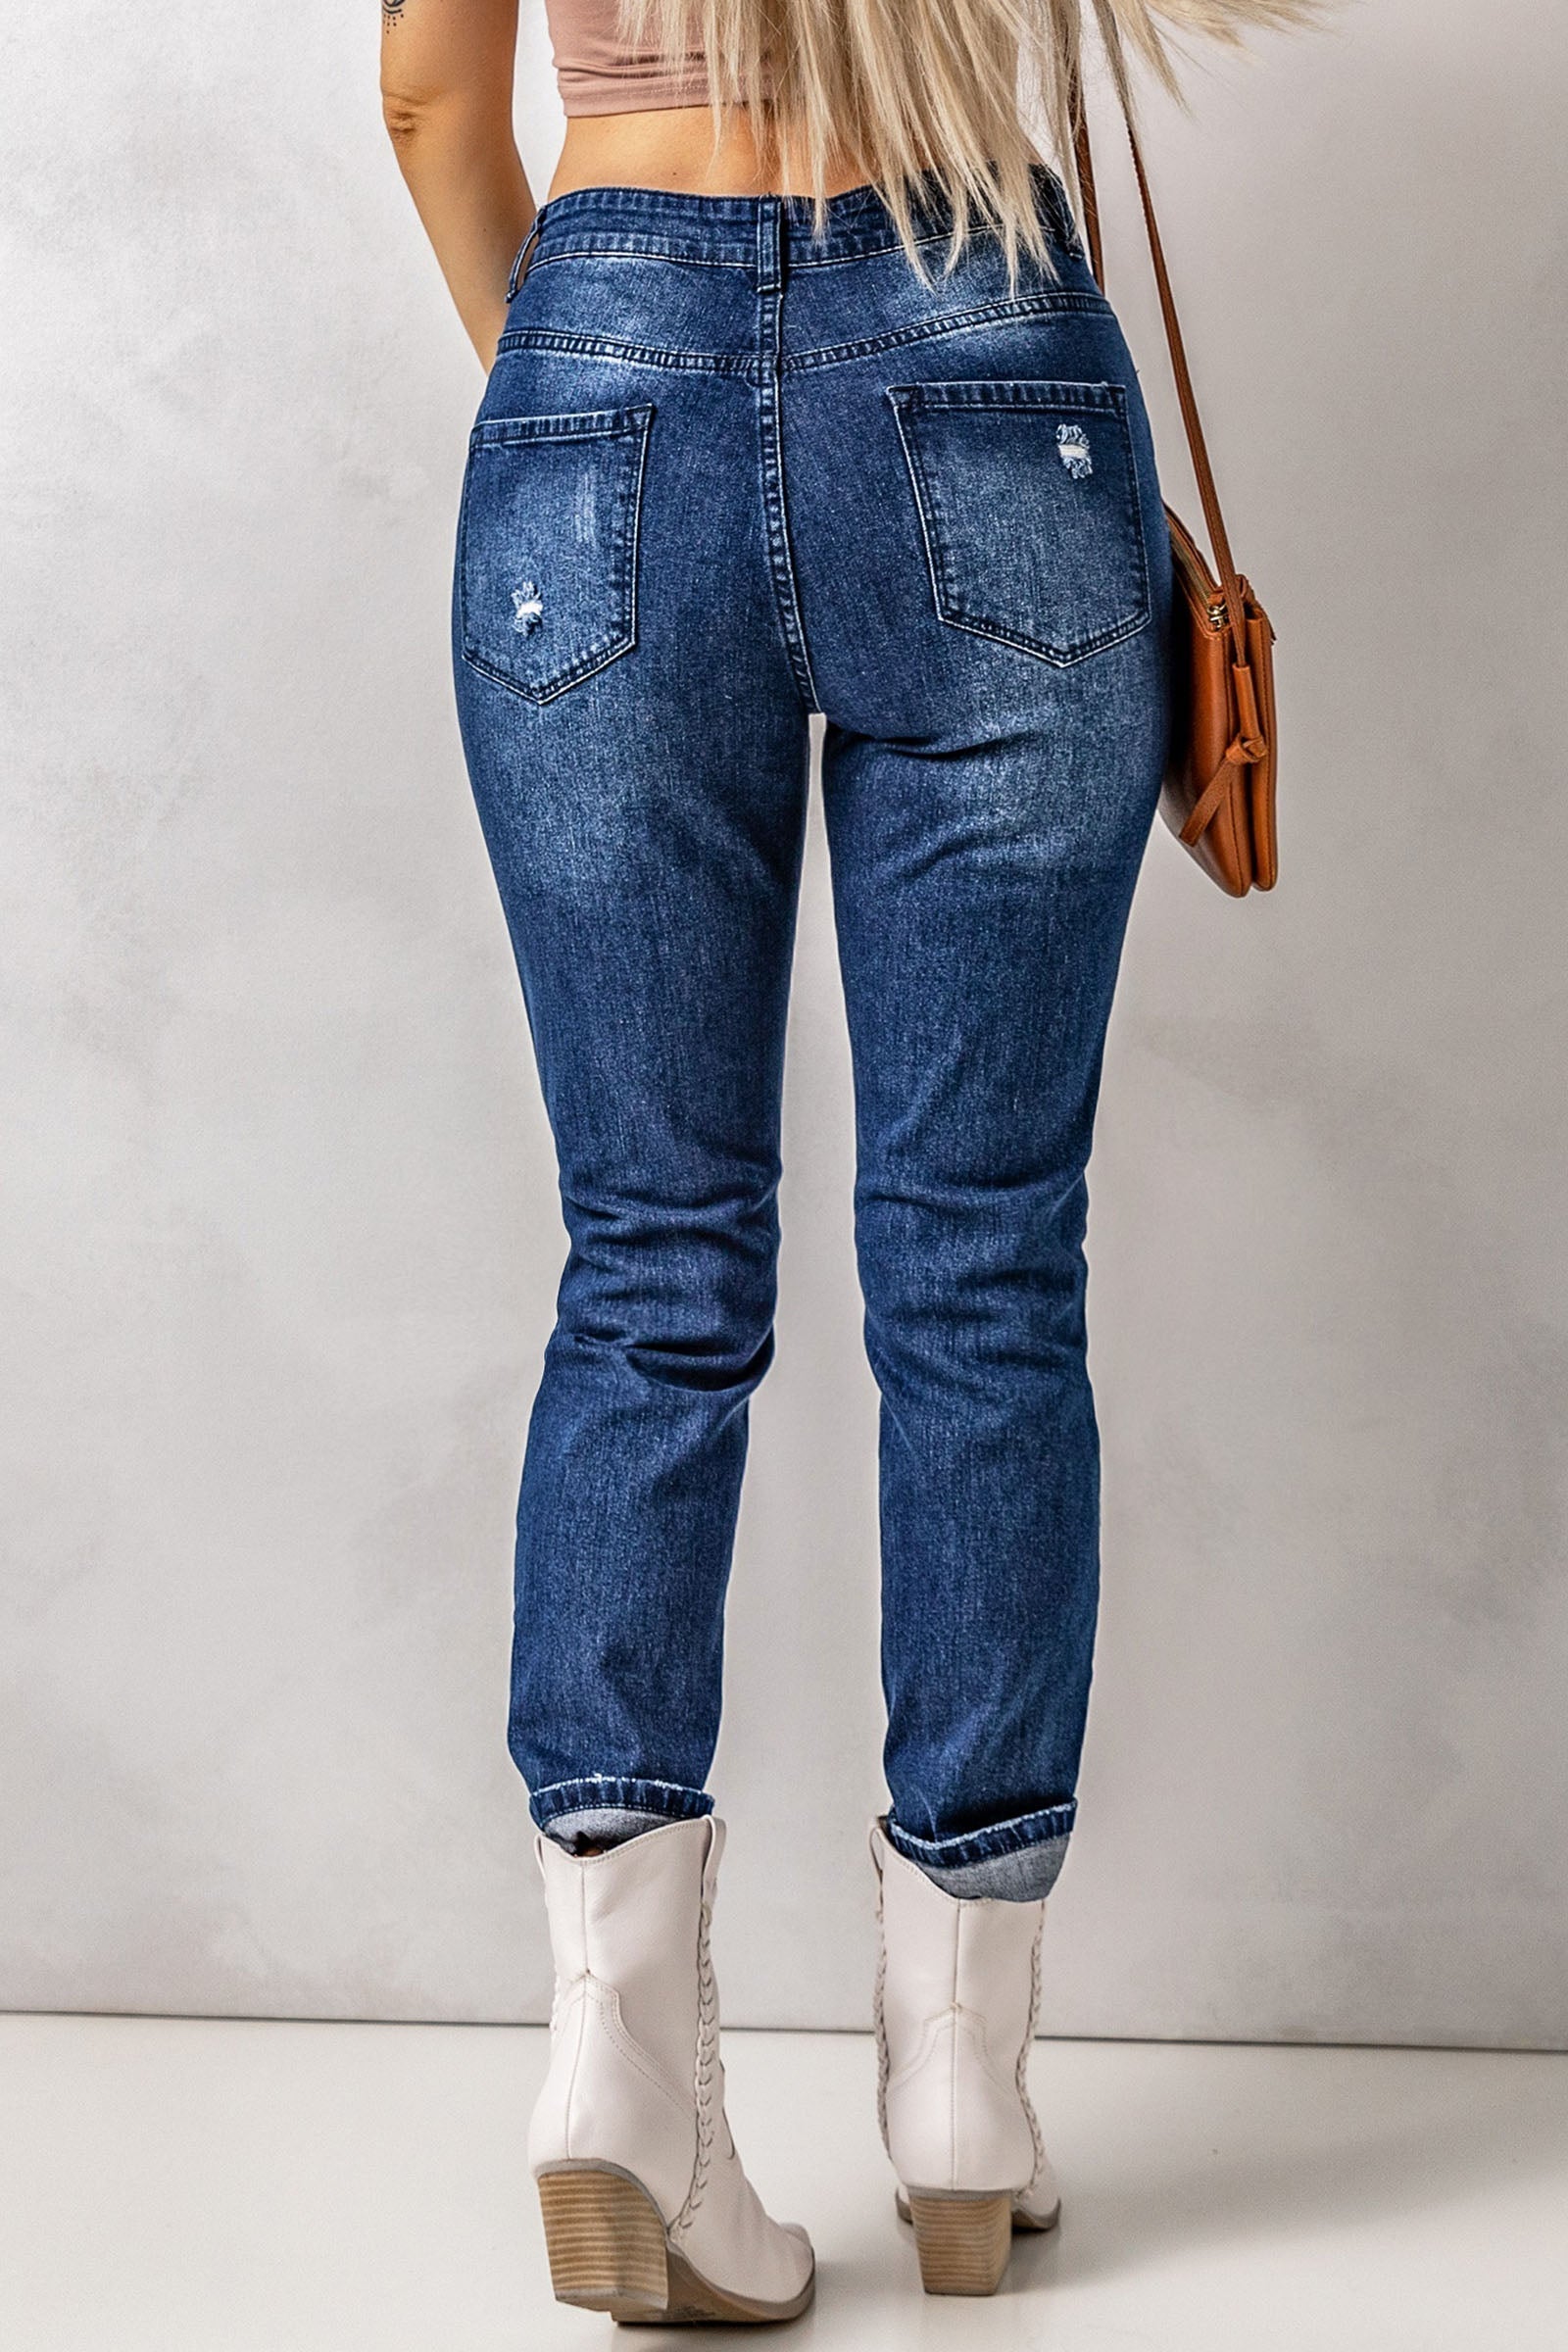 Distressed High Waist Jeans with Pockets Print on any thing USA/STOD clothes